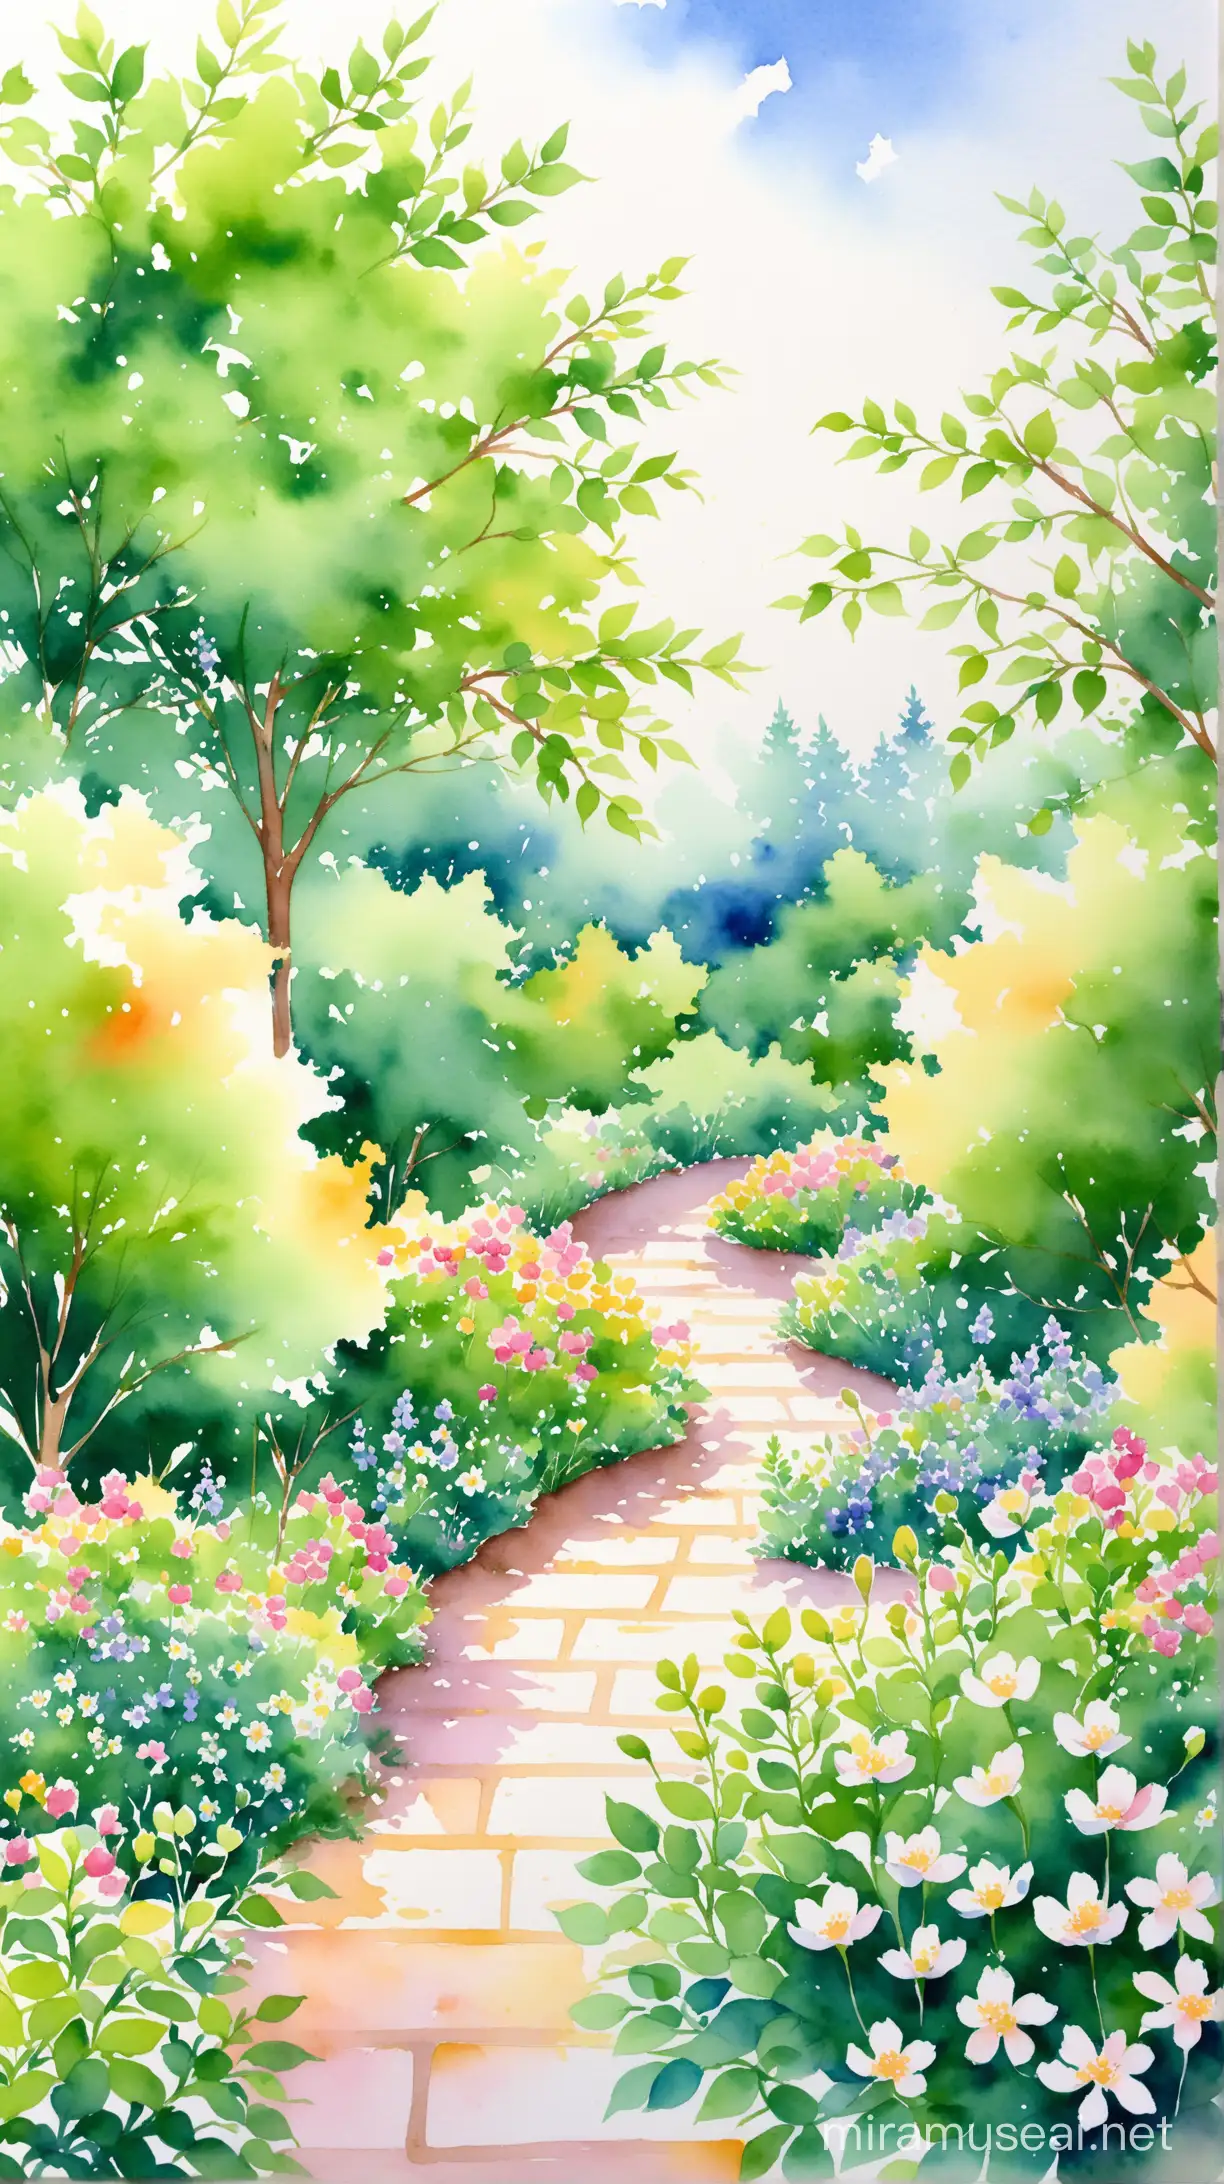 watercolour garden, green leaves, small flowers